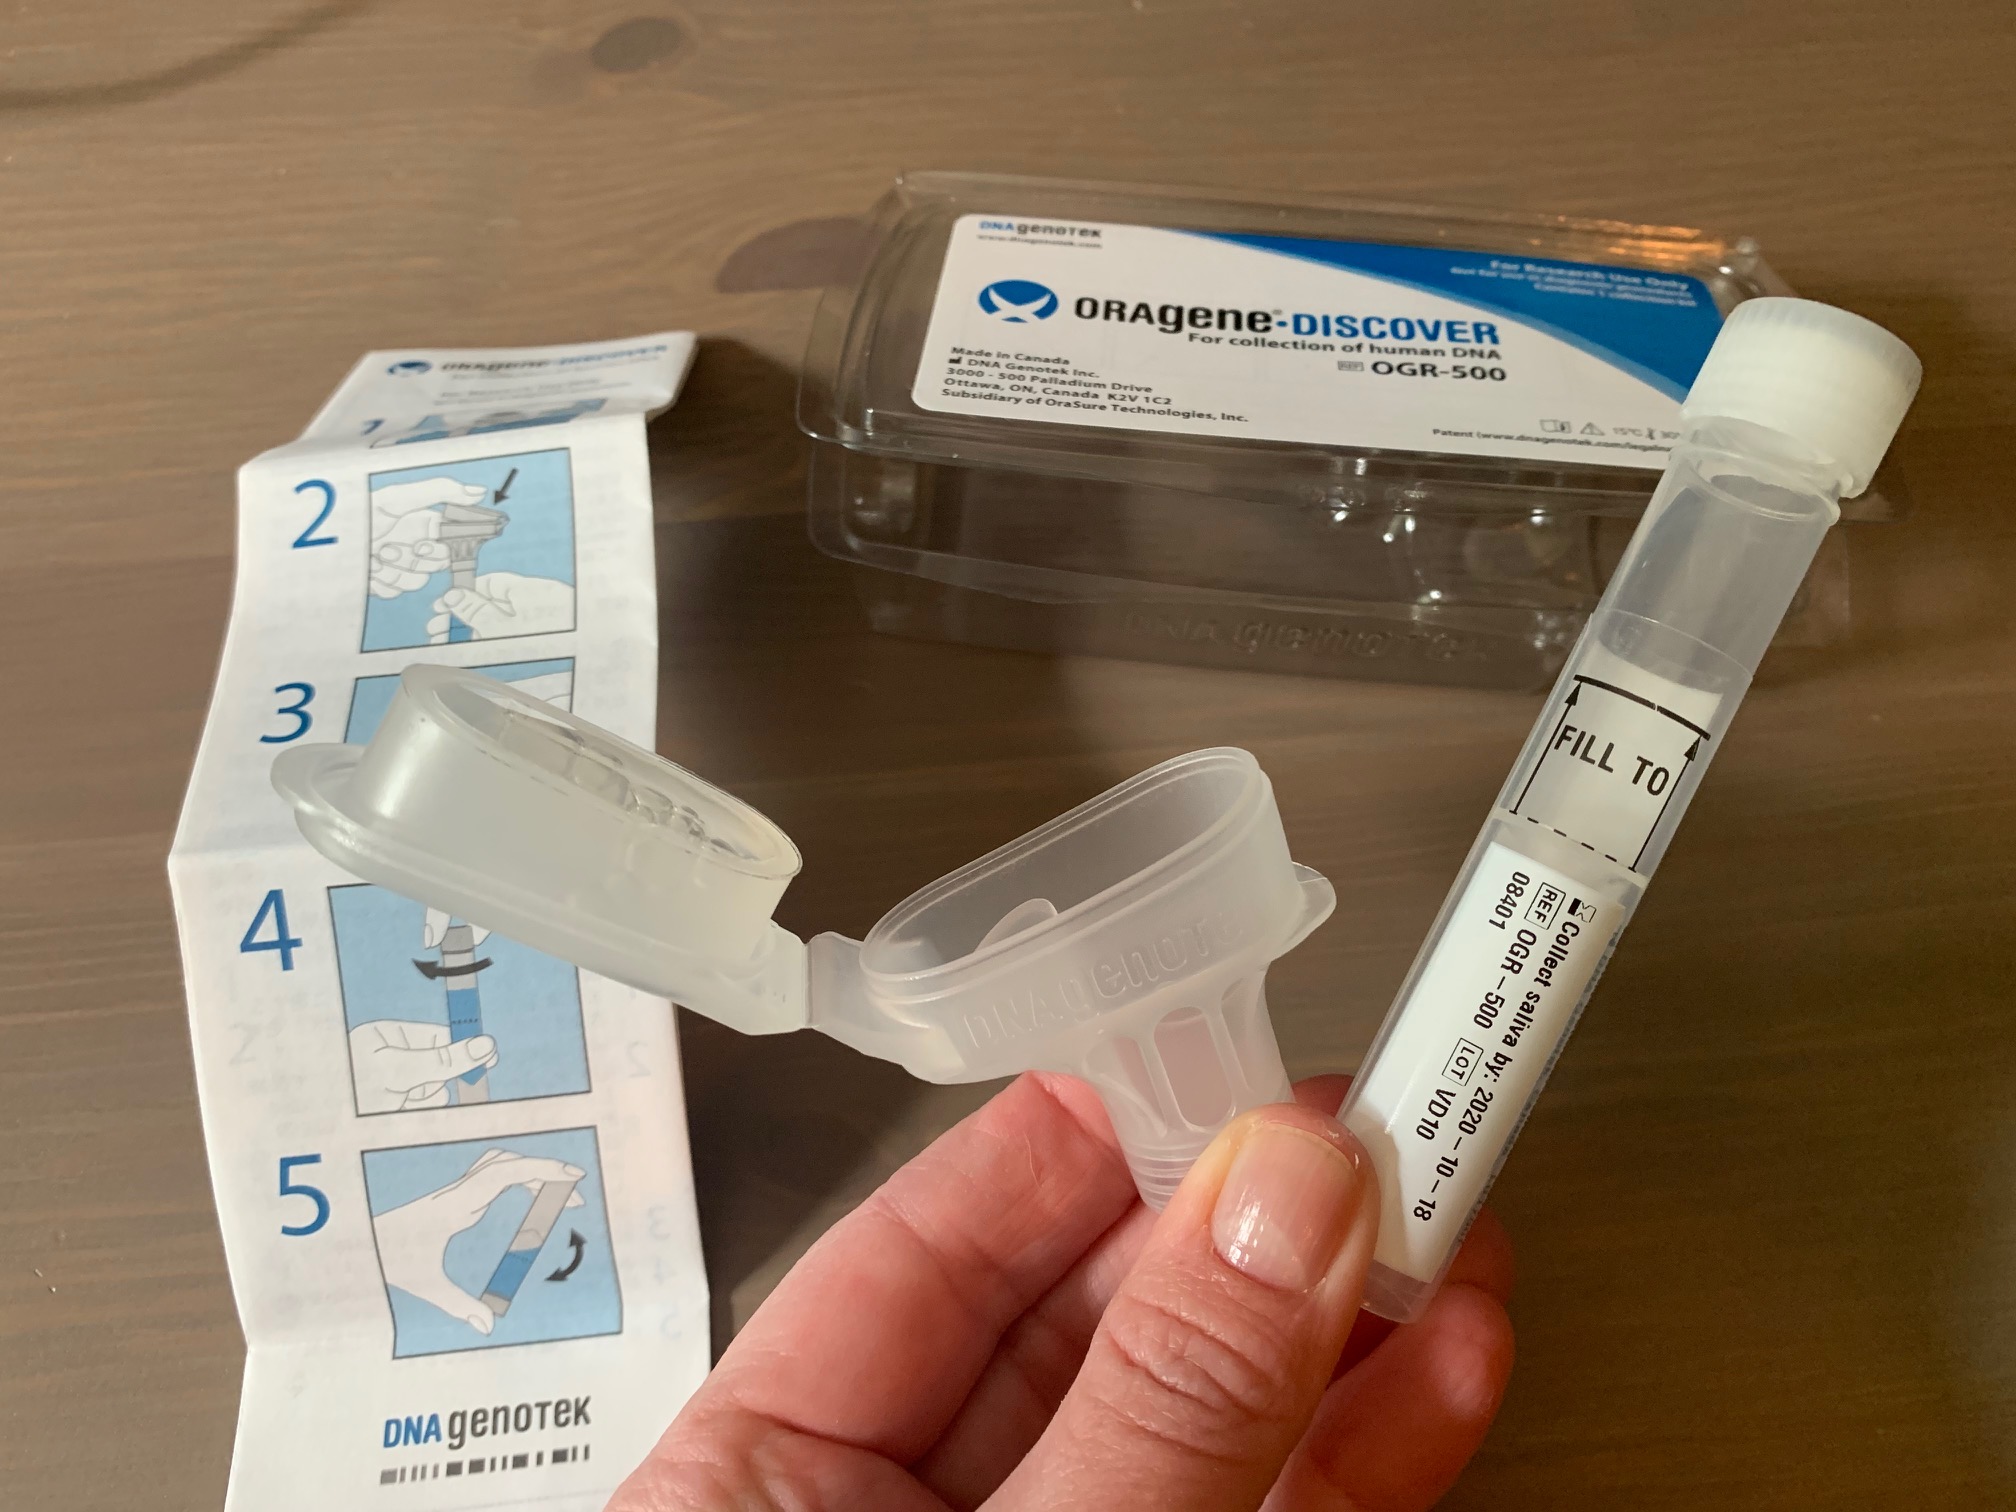 Instructions, tube, and packaging for a "spit kit" for DNA genetic testing
